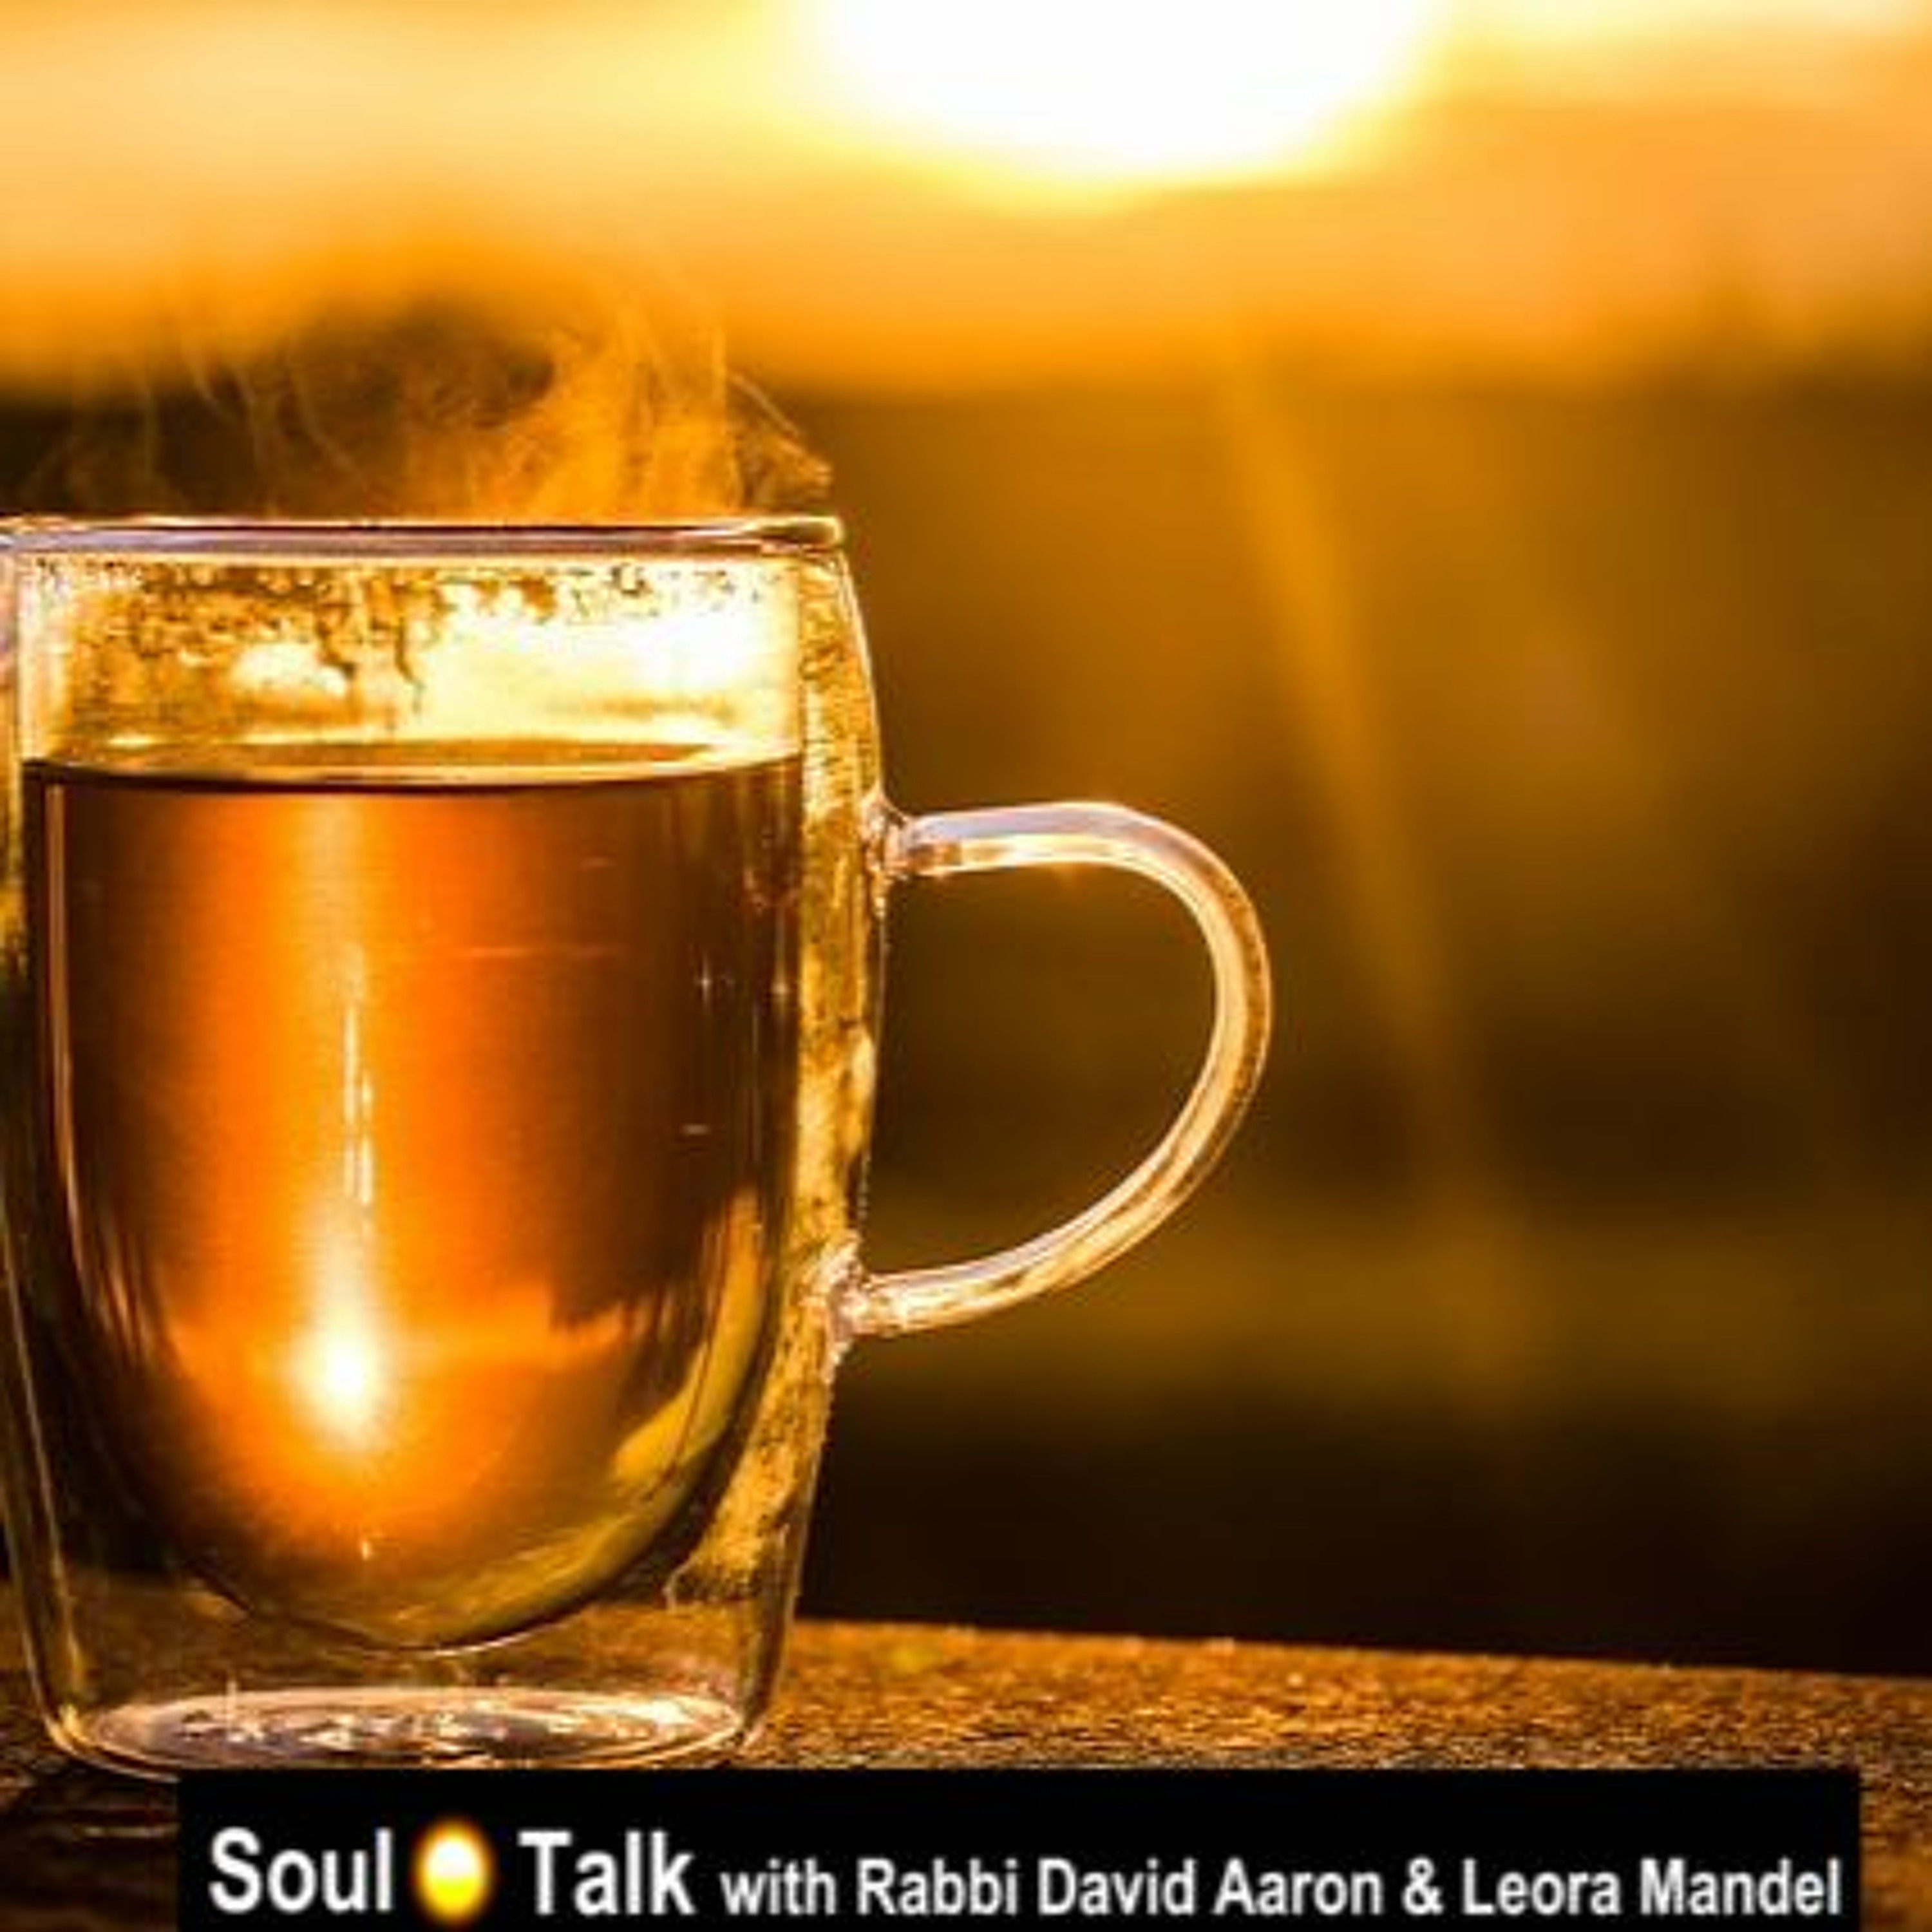 Enjoying A Balanced Approach To Finding Balance In Your Life - Soul Talk